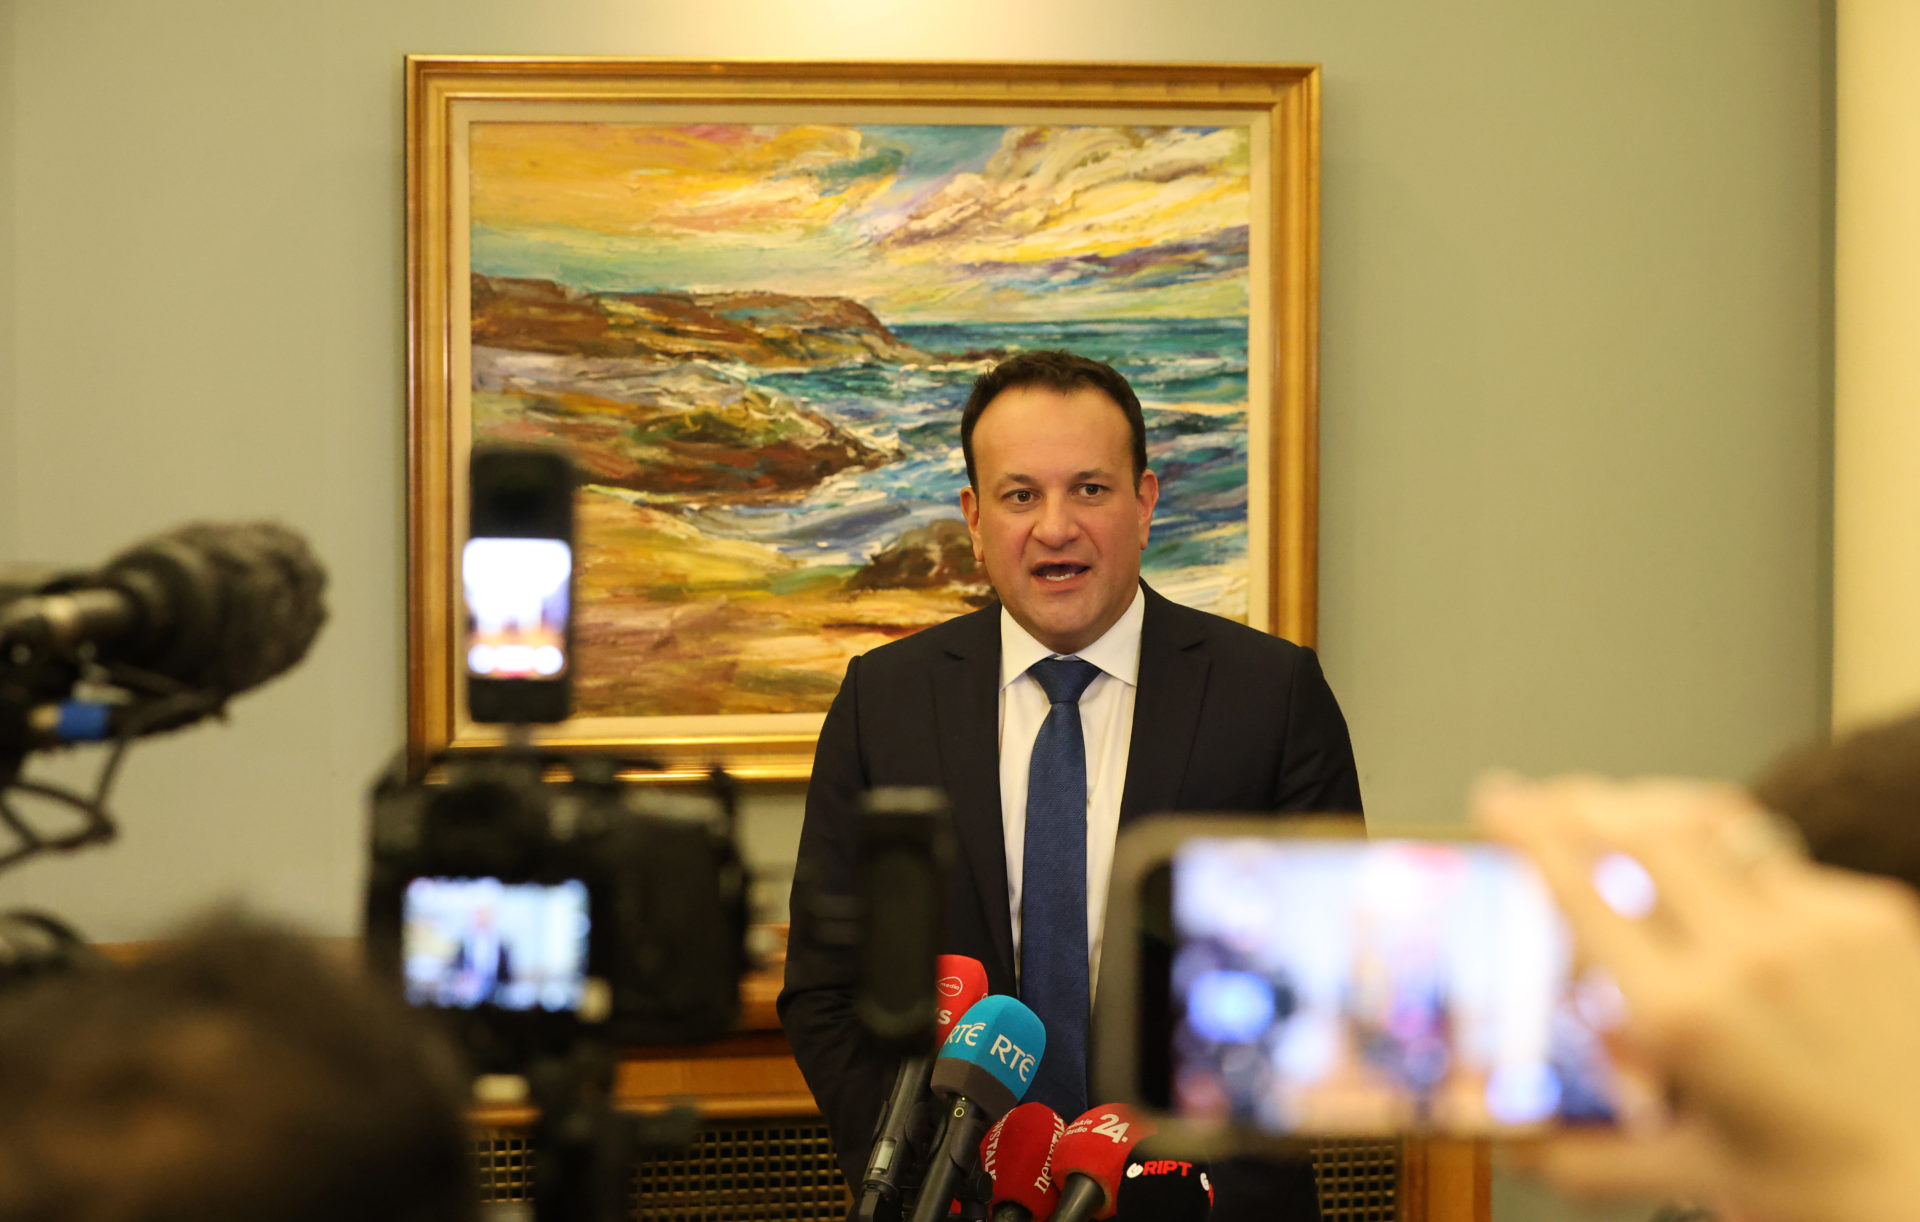 Taoiseach Leo Varadkar speaking to the media at Dublin Castle for the referendum on Family and Care. 9-3-24.